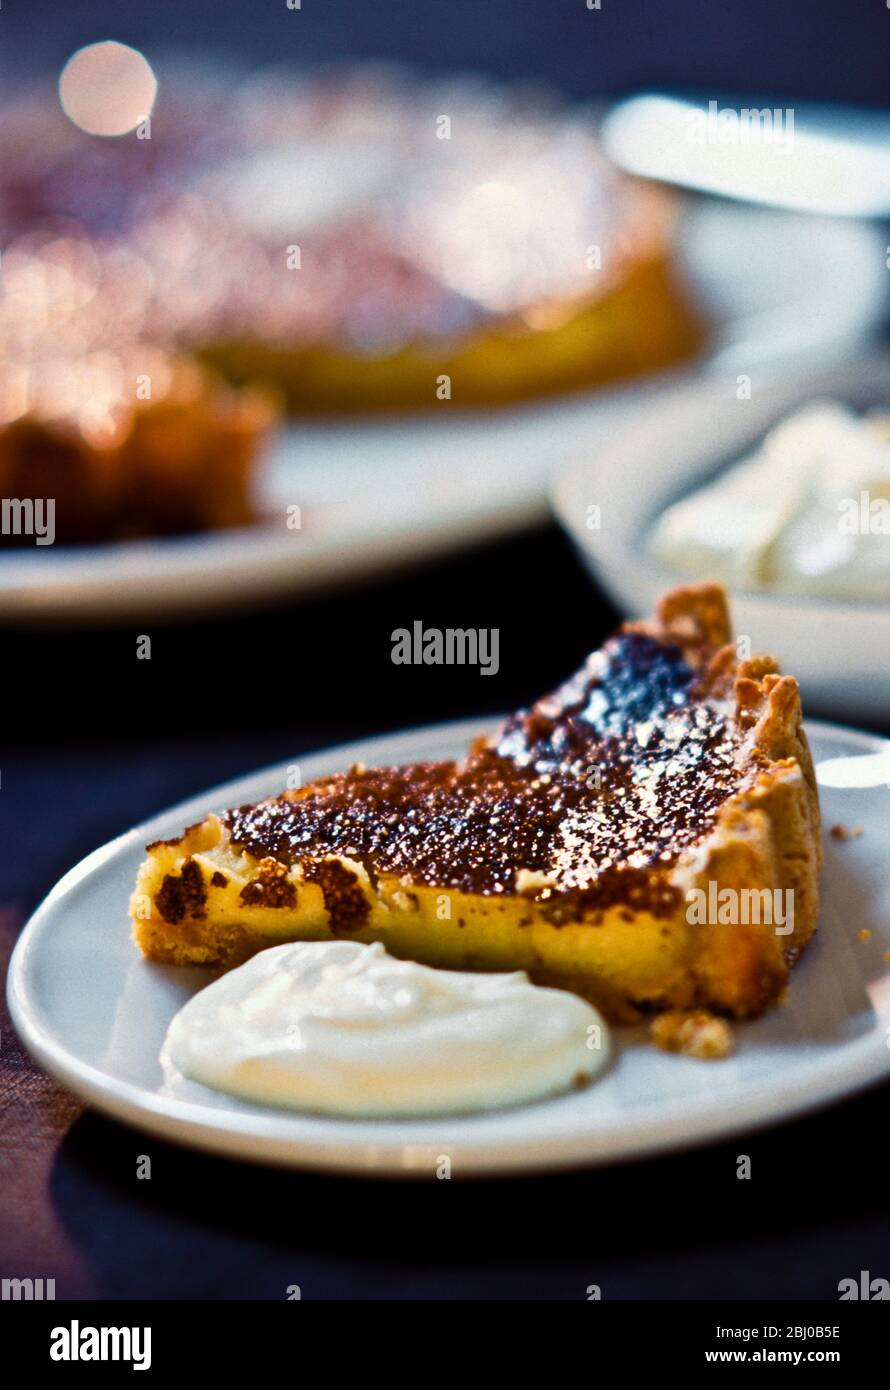 Slice of lemon tart with caramelised top, served with creme fraiche - Stock Photo